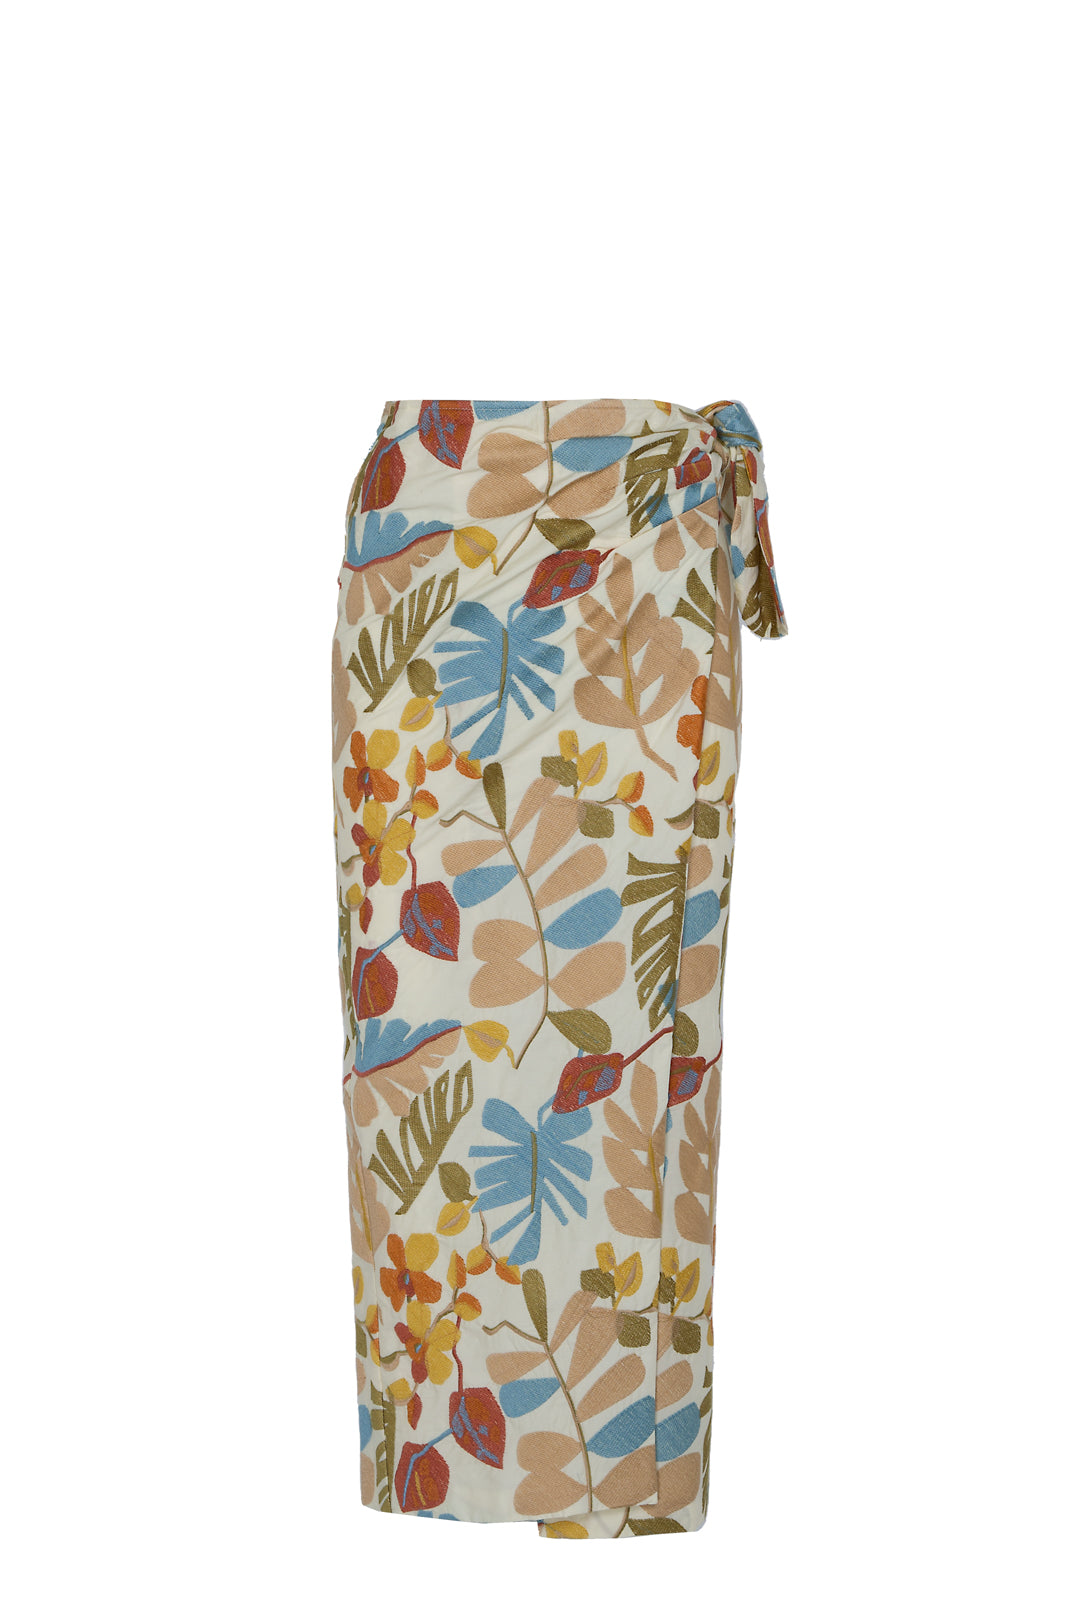 EMBROIDERED TROPICAL FLOWER DAISY SKIRT